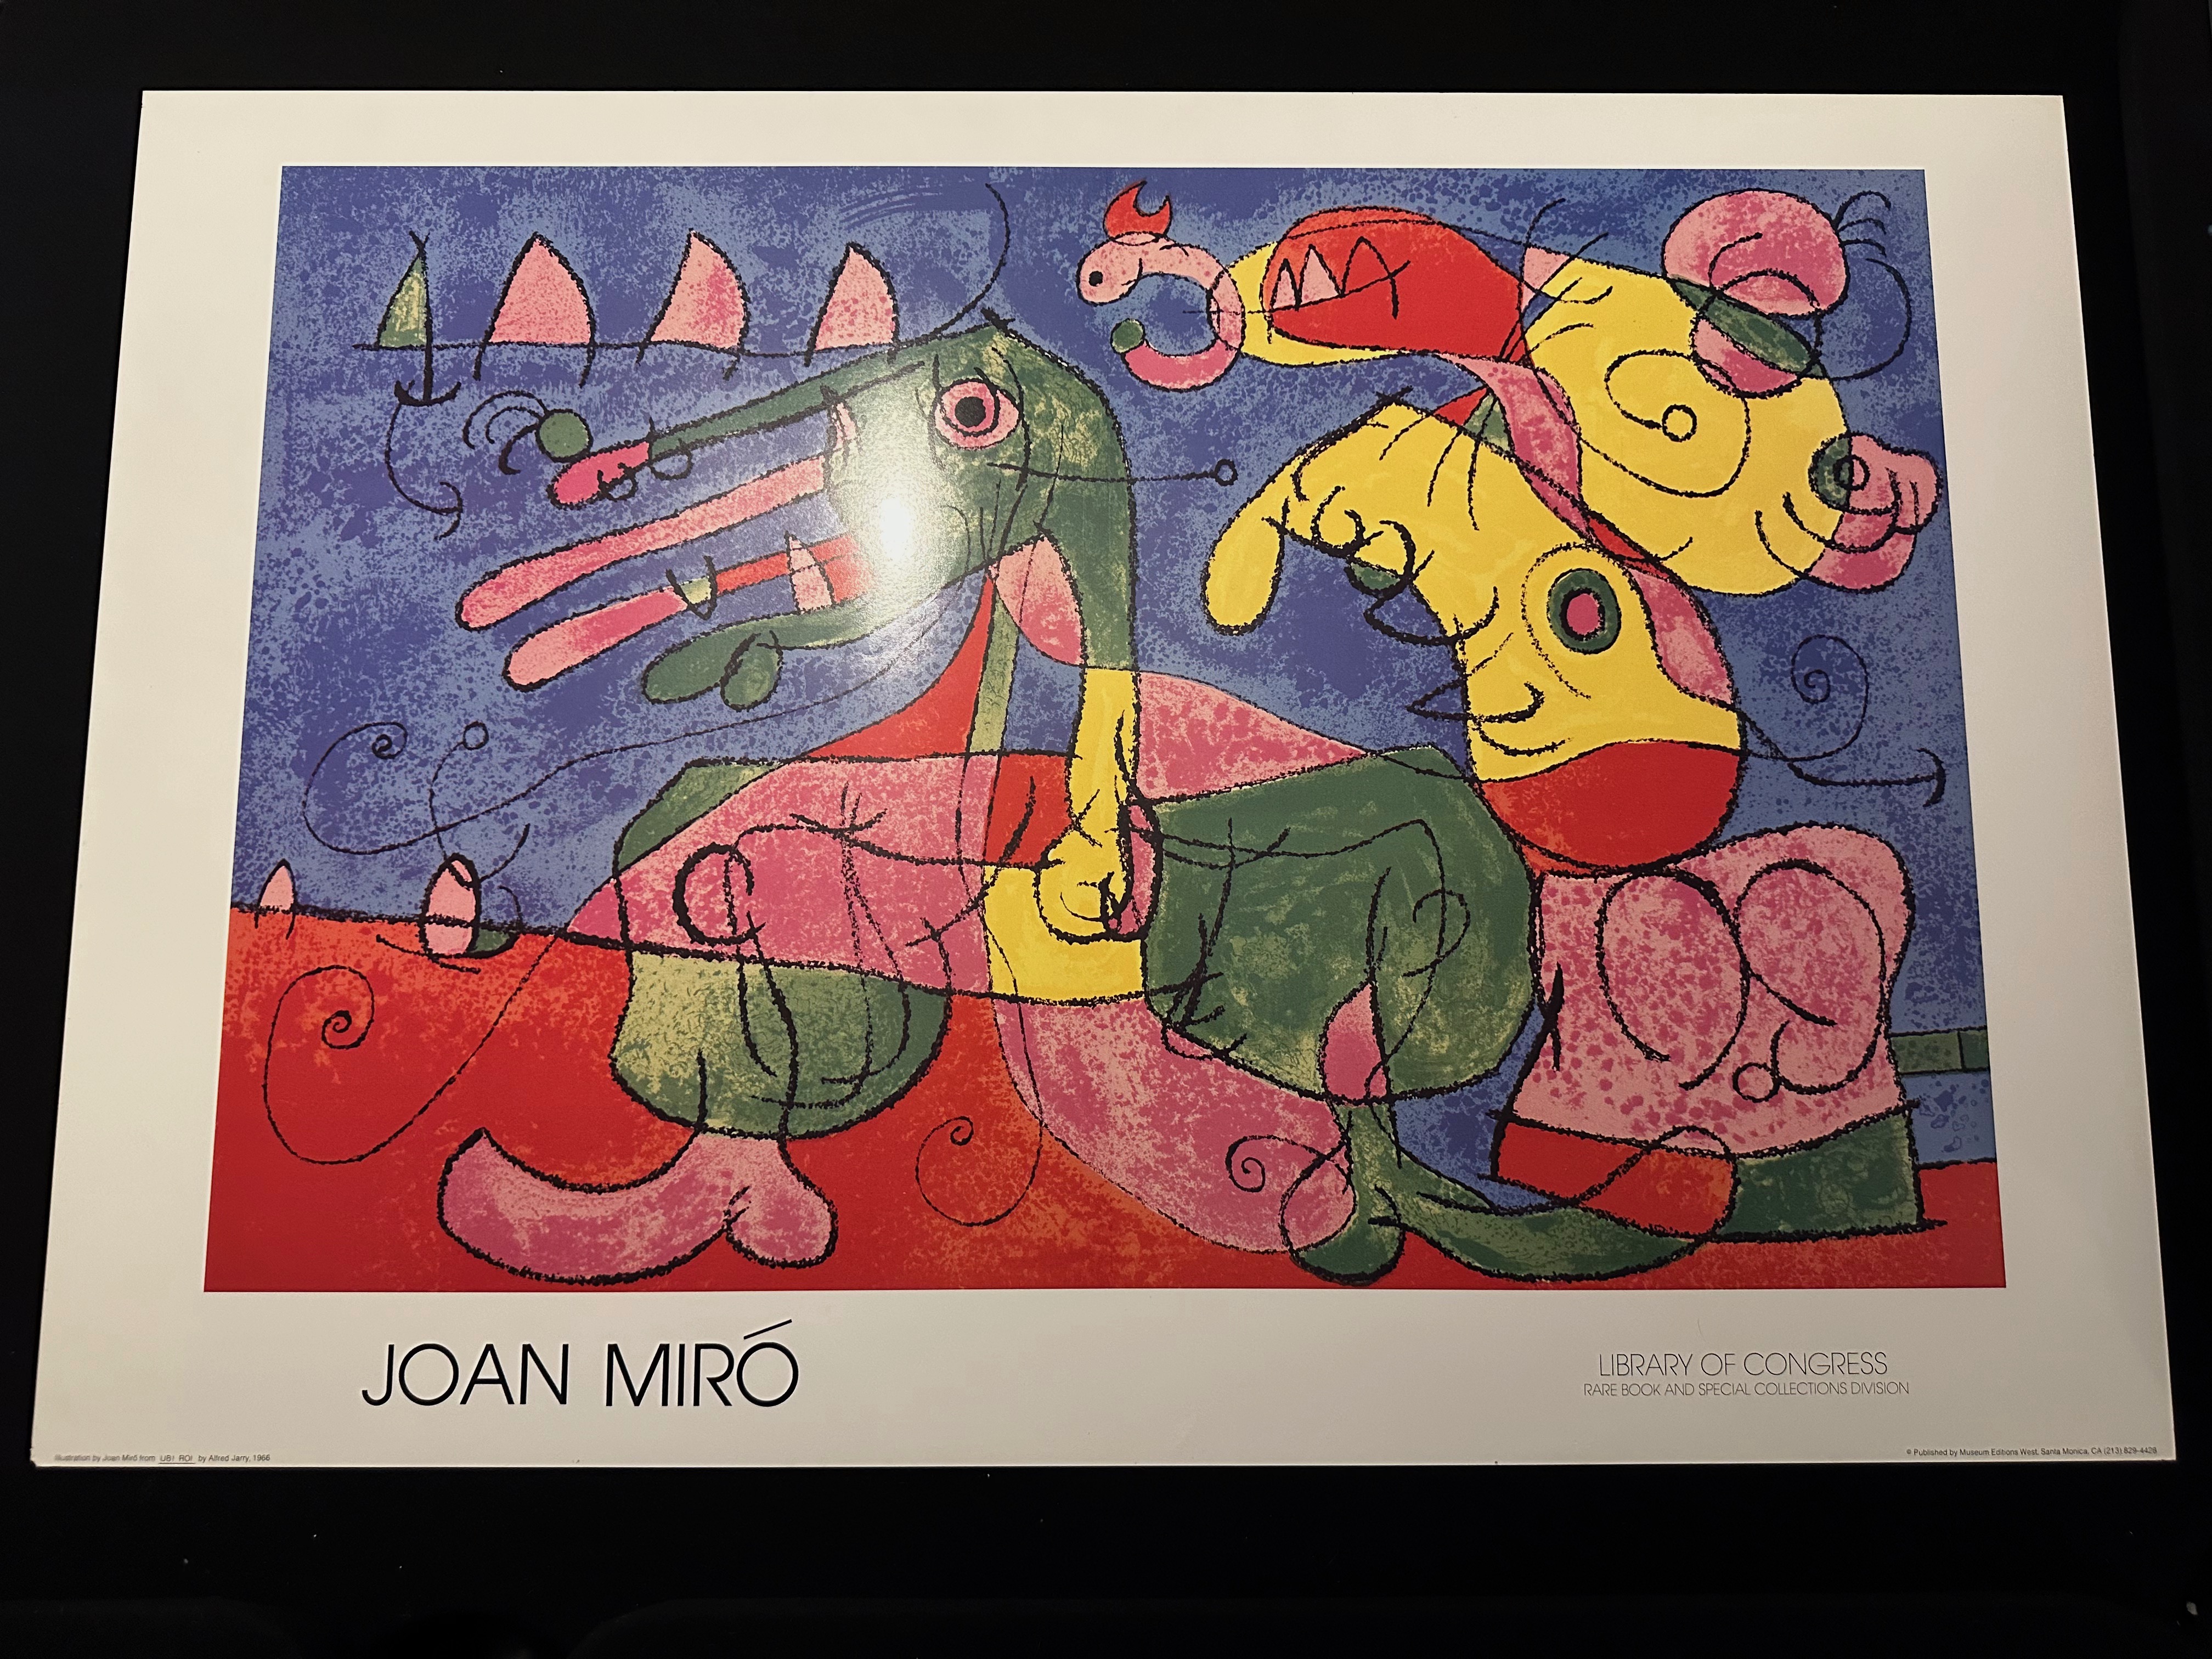 Joan Miro, Library of Congress, Rare Book and Special Collections Division.